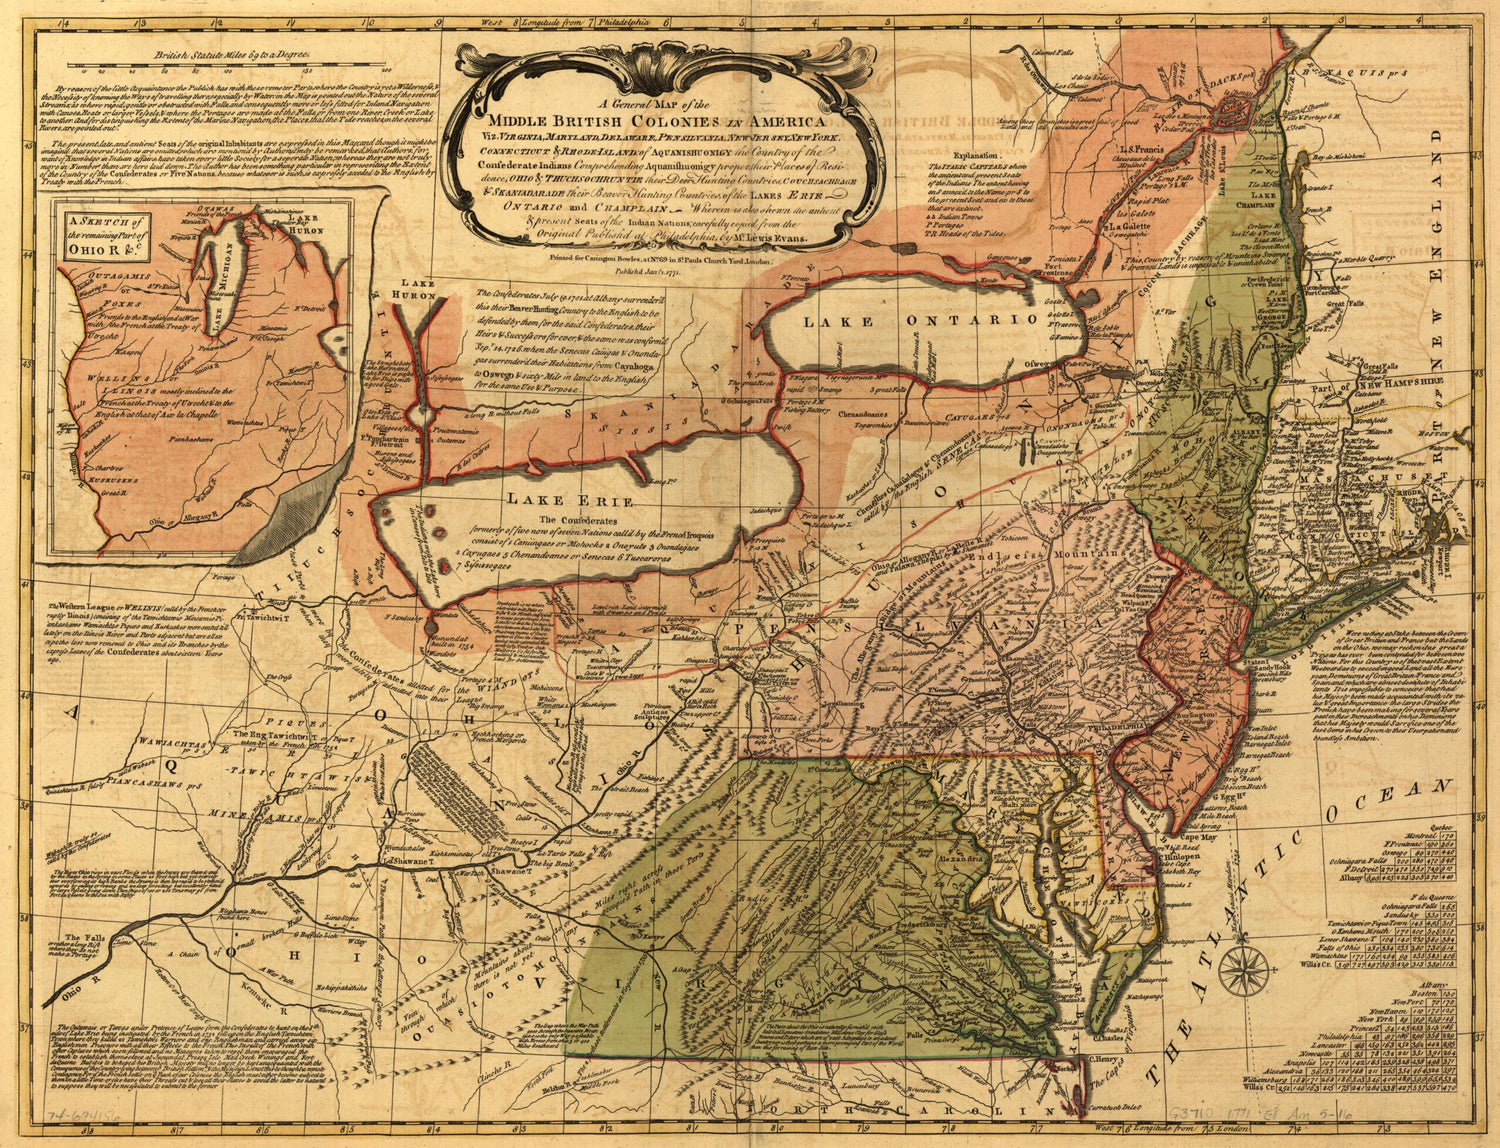 This old map of Jersey, New York, Connecticut &amp; Rhode-Island: of Aquanishuonigy the Country of the Confederate Indians Comprehending Aquanishuonigy Proper, Their Places of Residence, Ohio &amp; Thuchsochruntie Their Deer Hunting Countries, Couchsachrage &amp; Sk